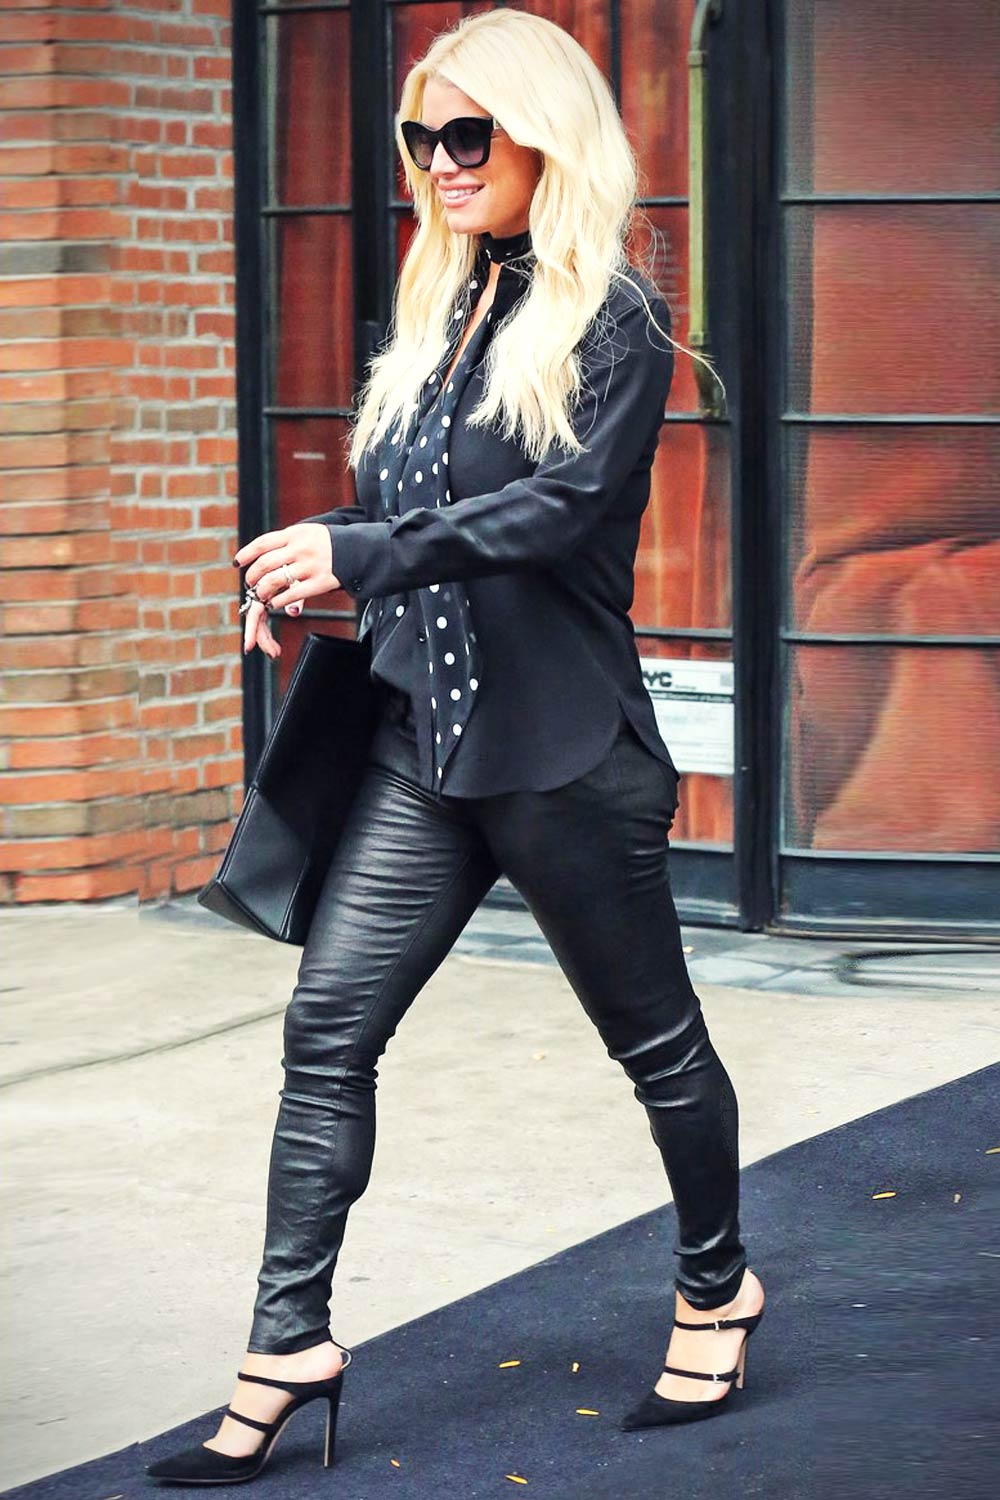 http://www.leathercelebrities.com/images/uploads/Jessica-Simpson-out-and-about003.jpg